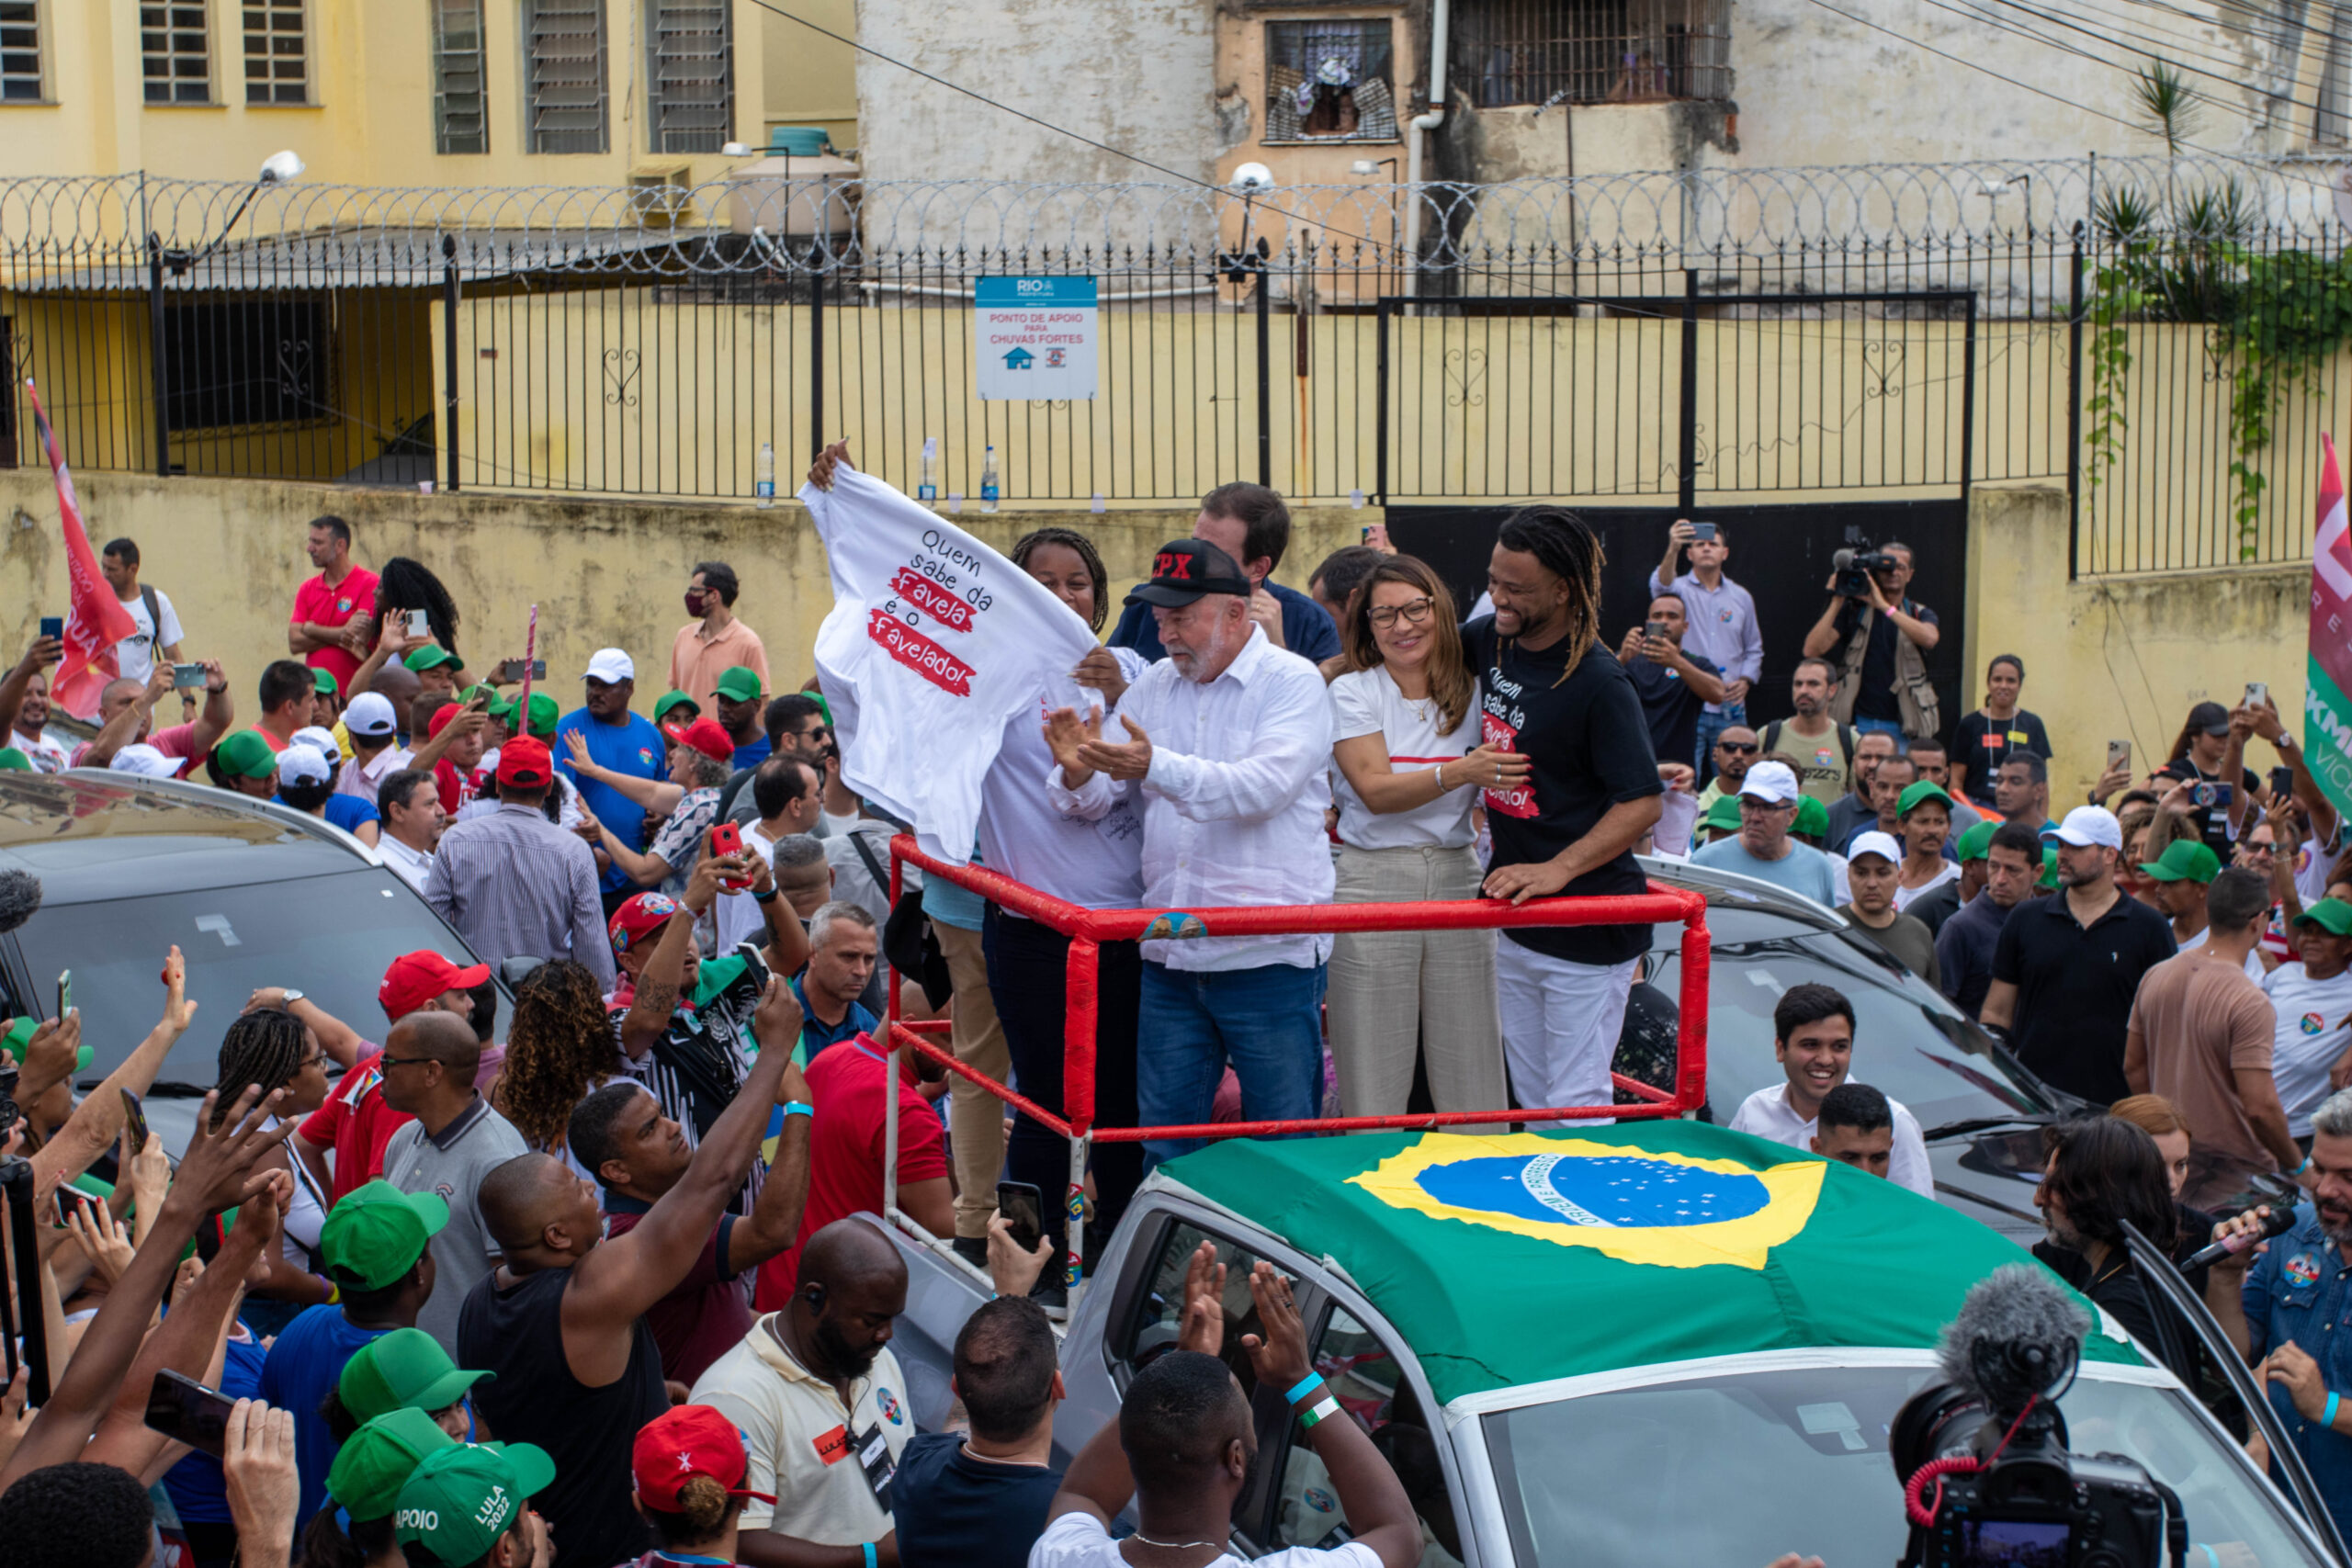 Rene Silva stood beside first lady Janja and Lula, in his visit to Complexo do Alemão during the 2022 elections. Photo: Vilma Ribeiro/Voz das Comunidades